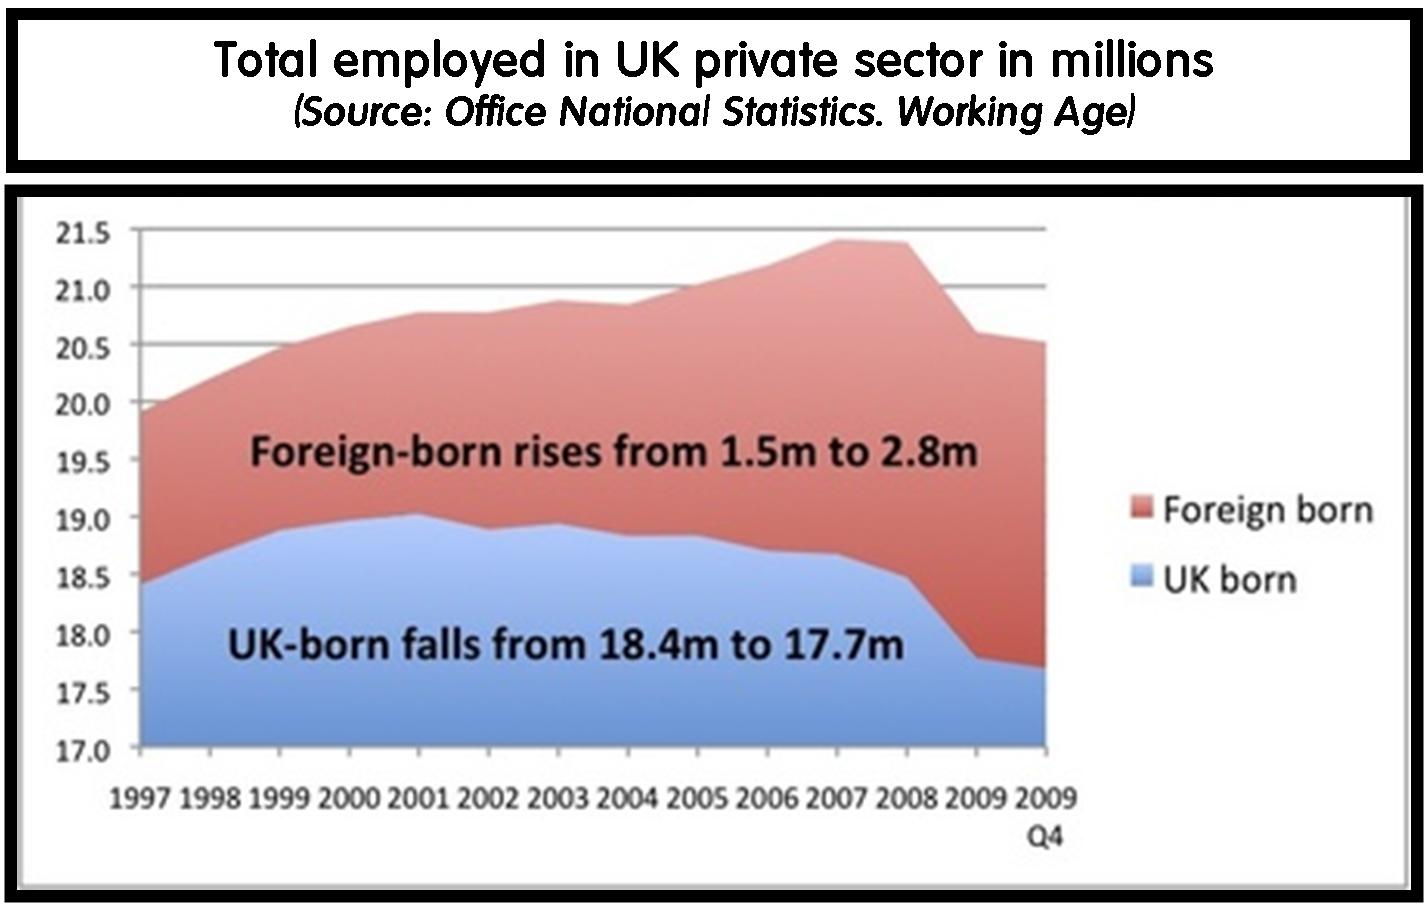 April+2010+Immigrant+Employment+in+UK+Private+Sector.jpg